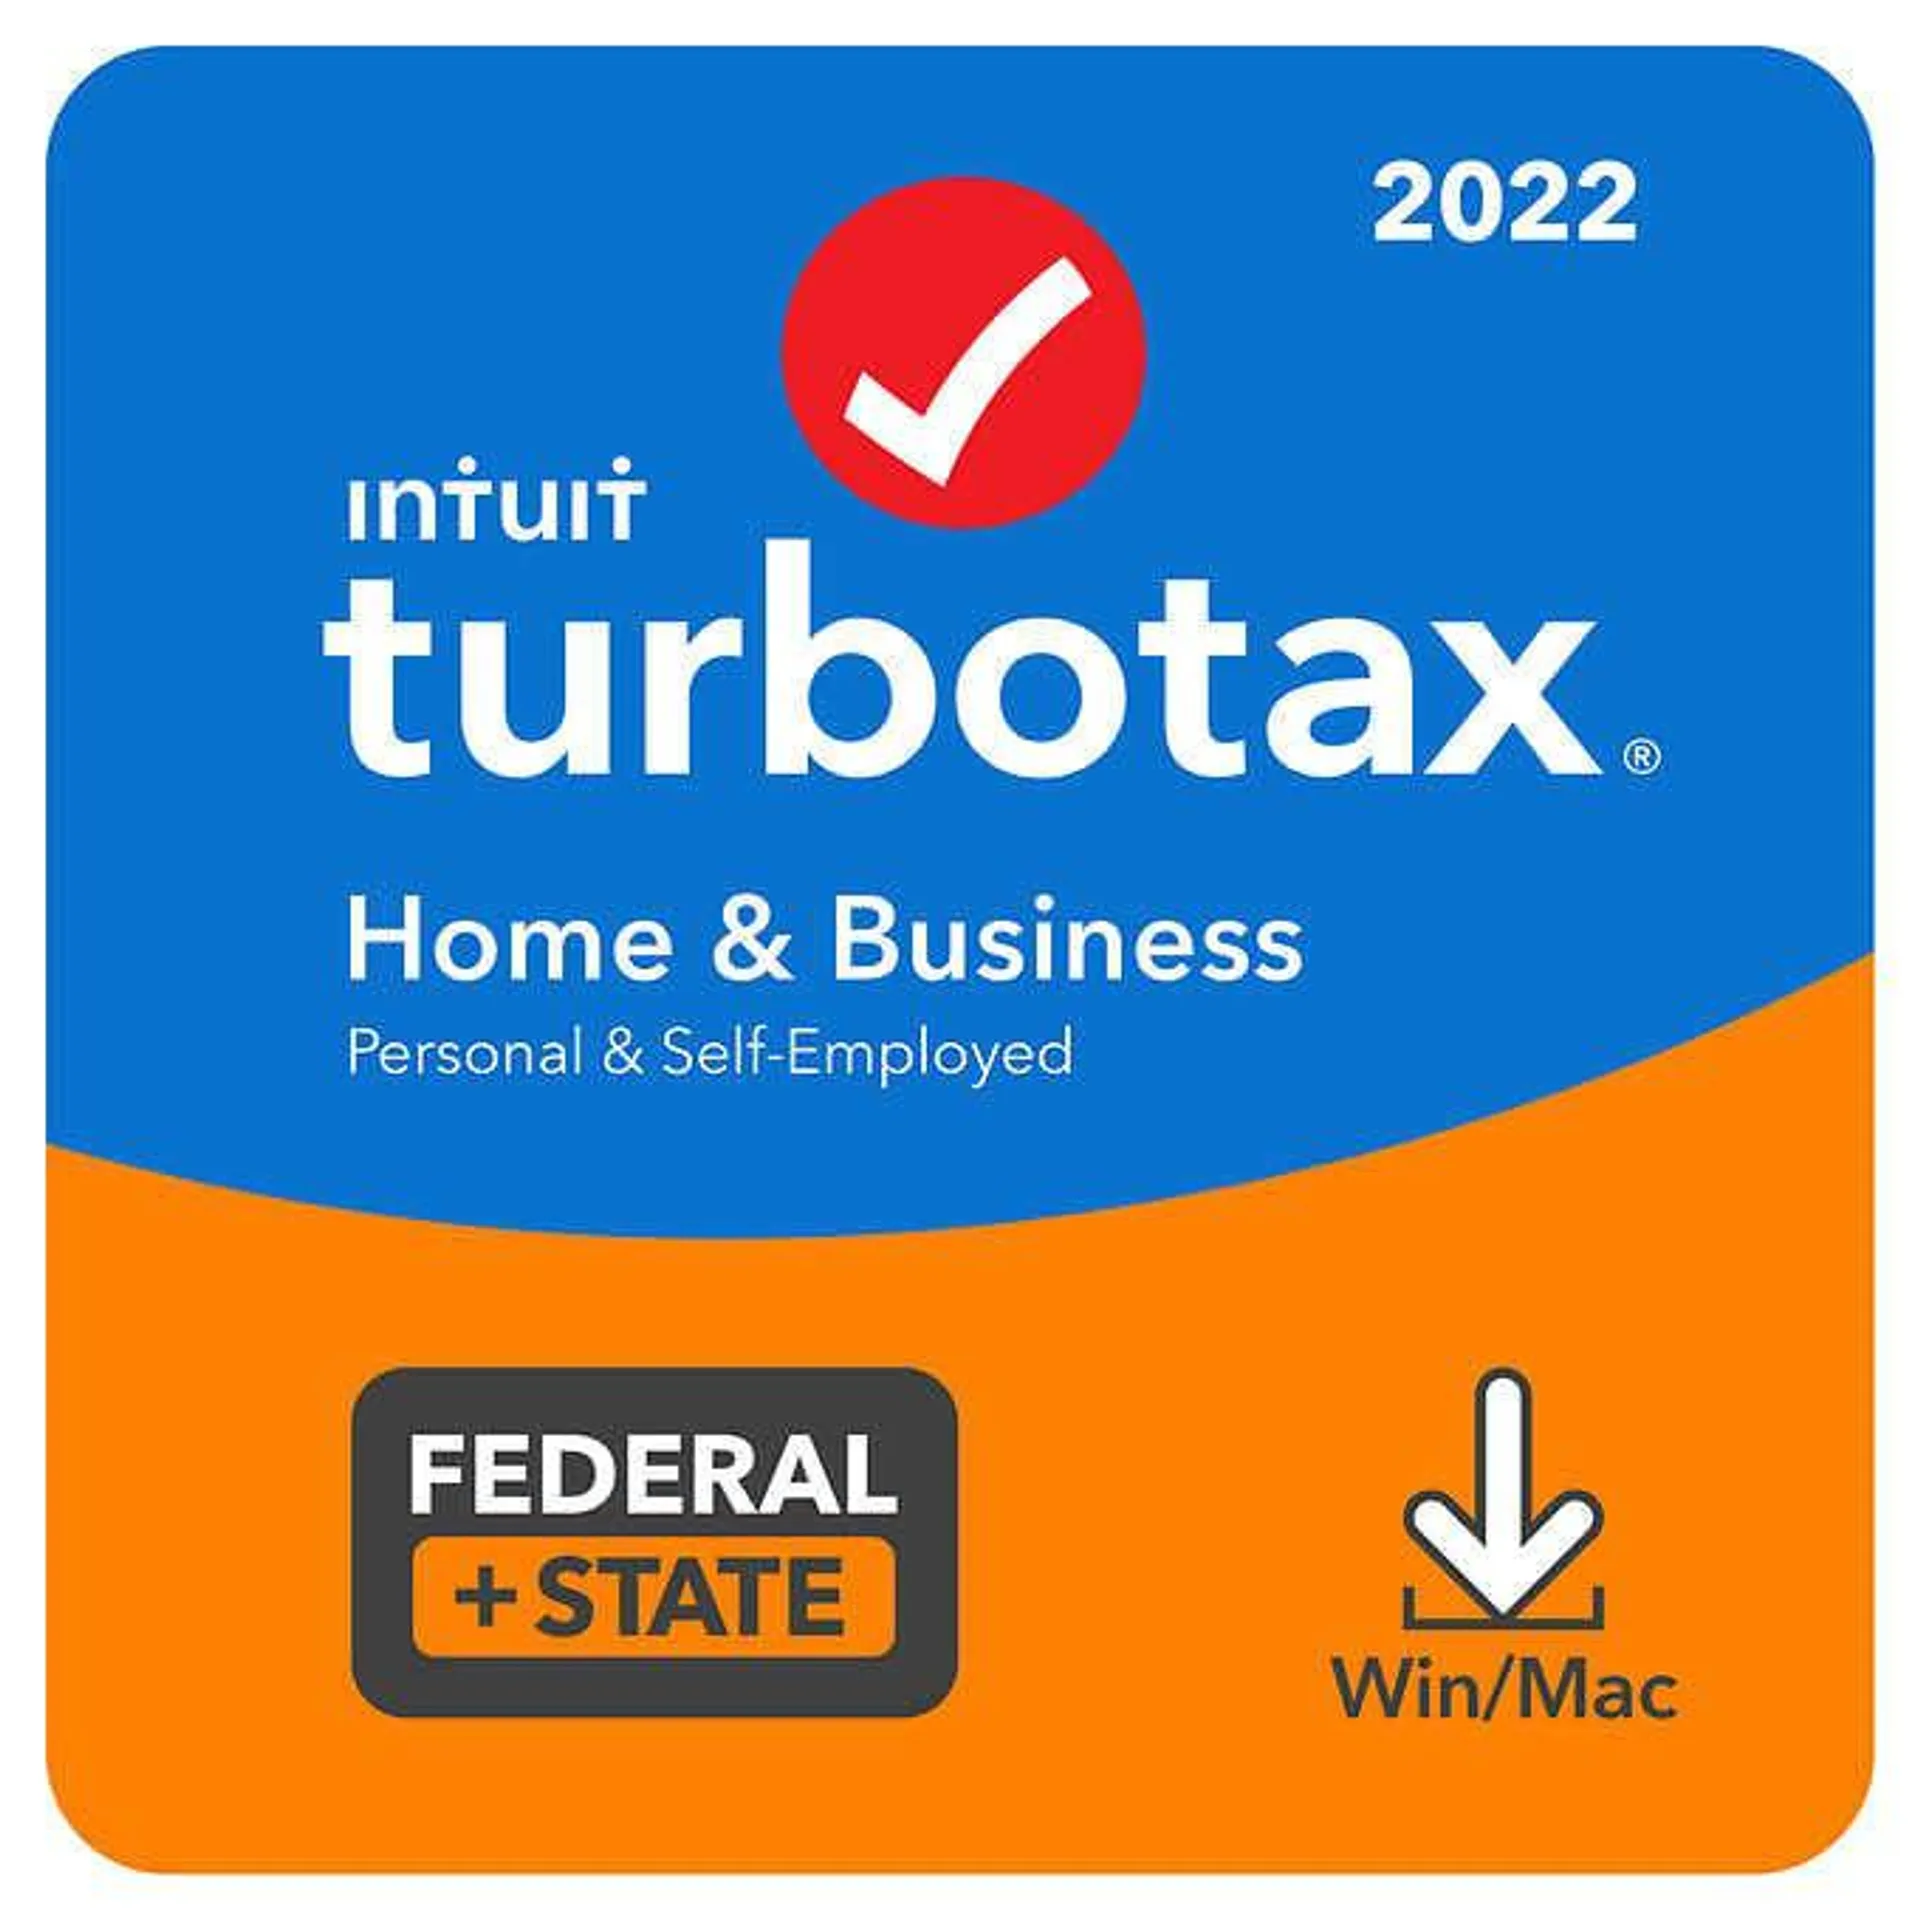 TurboTax Home & Business 2022 Federal E-File + State Download, for PC/Mac, Includes $10 Credit In-Product*